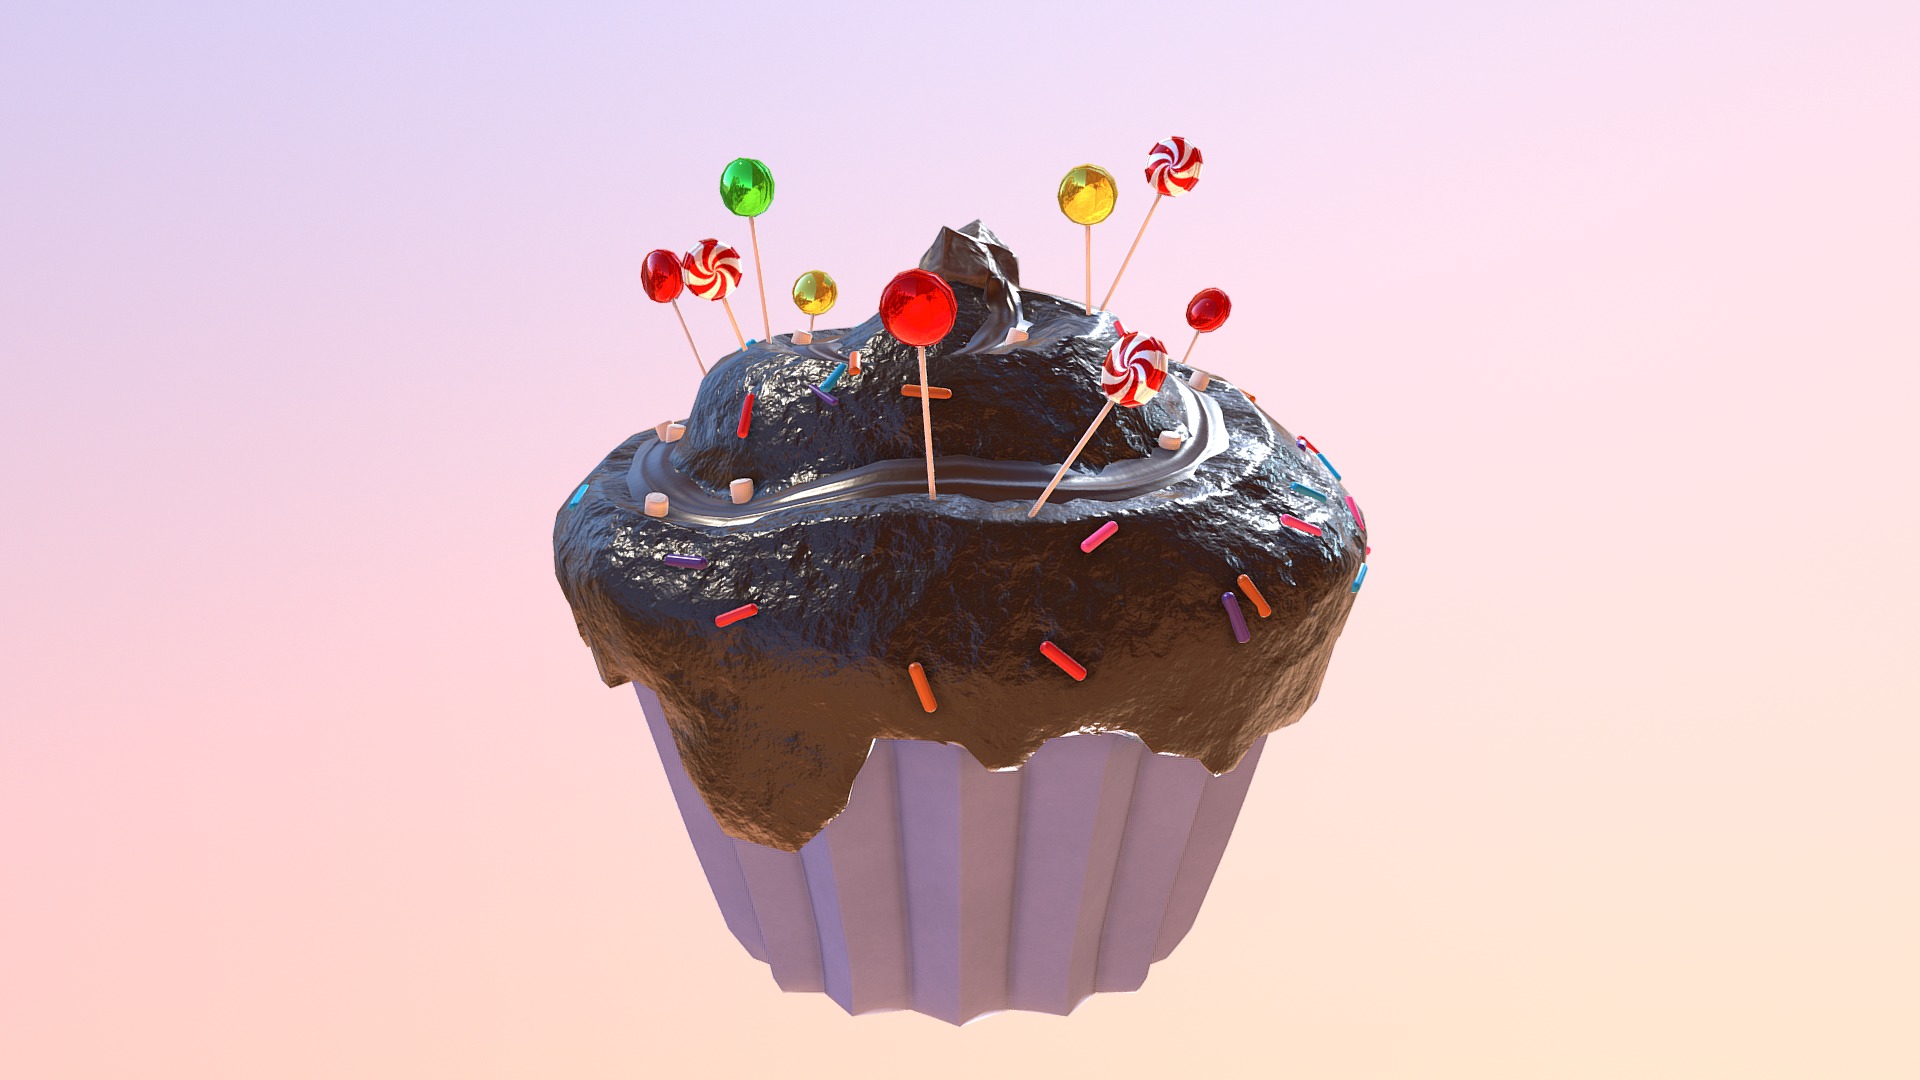 3D model Cupcake Meditation - This is a 3D model of the Cupcake Meditation. The 3D model is about a blue cake with red and white decorations.